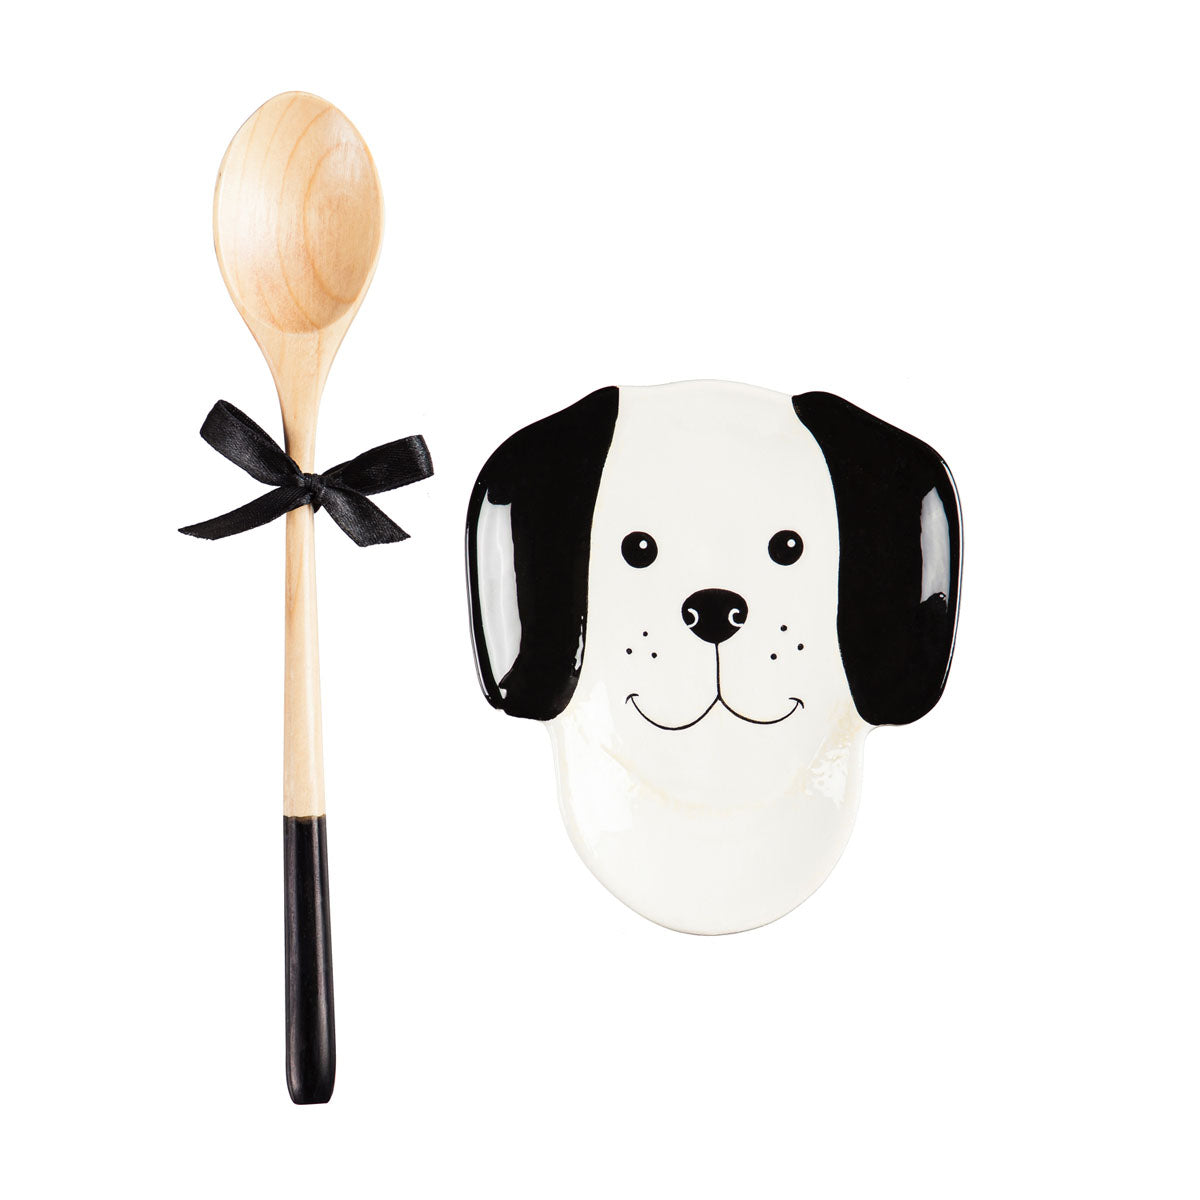 Ceramic Dog Spoon Rest with Wooden Spoon